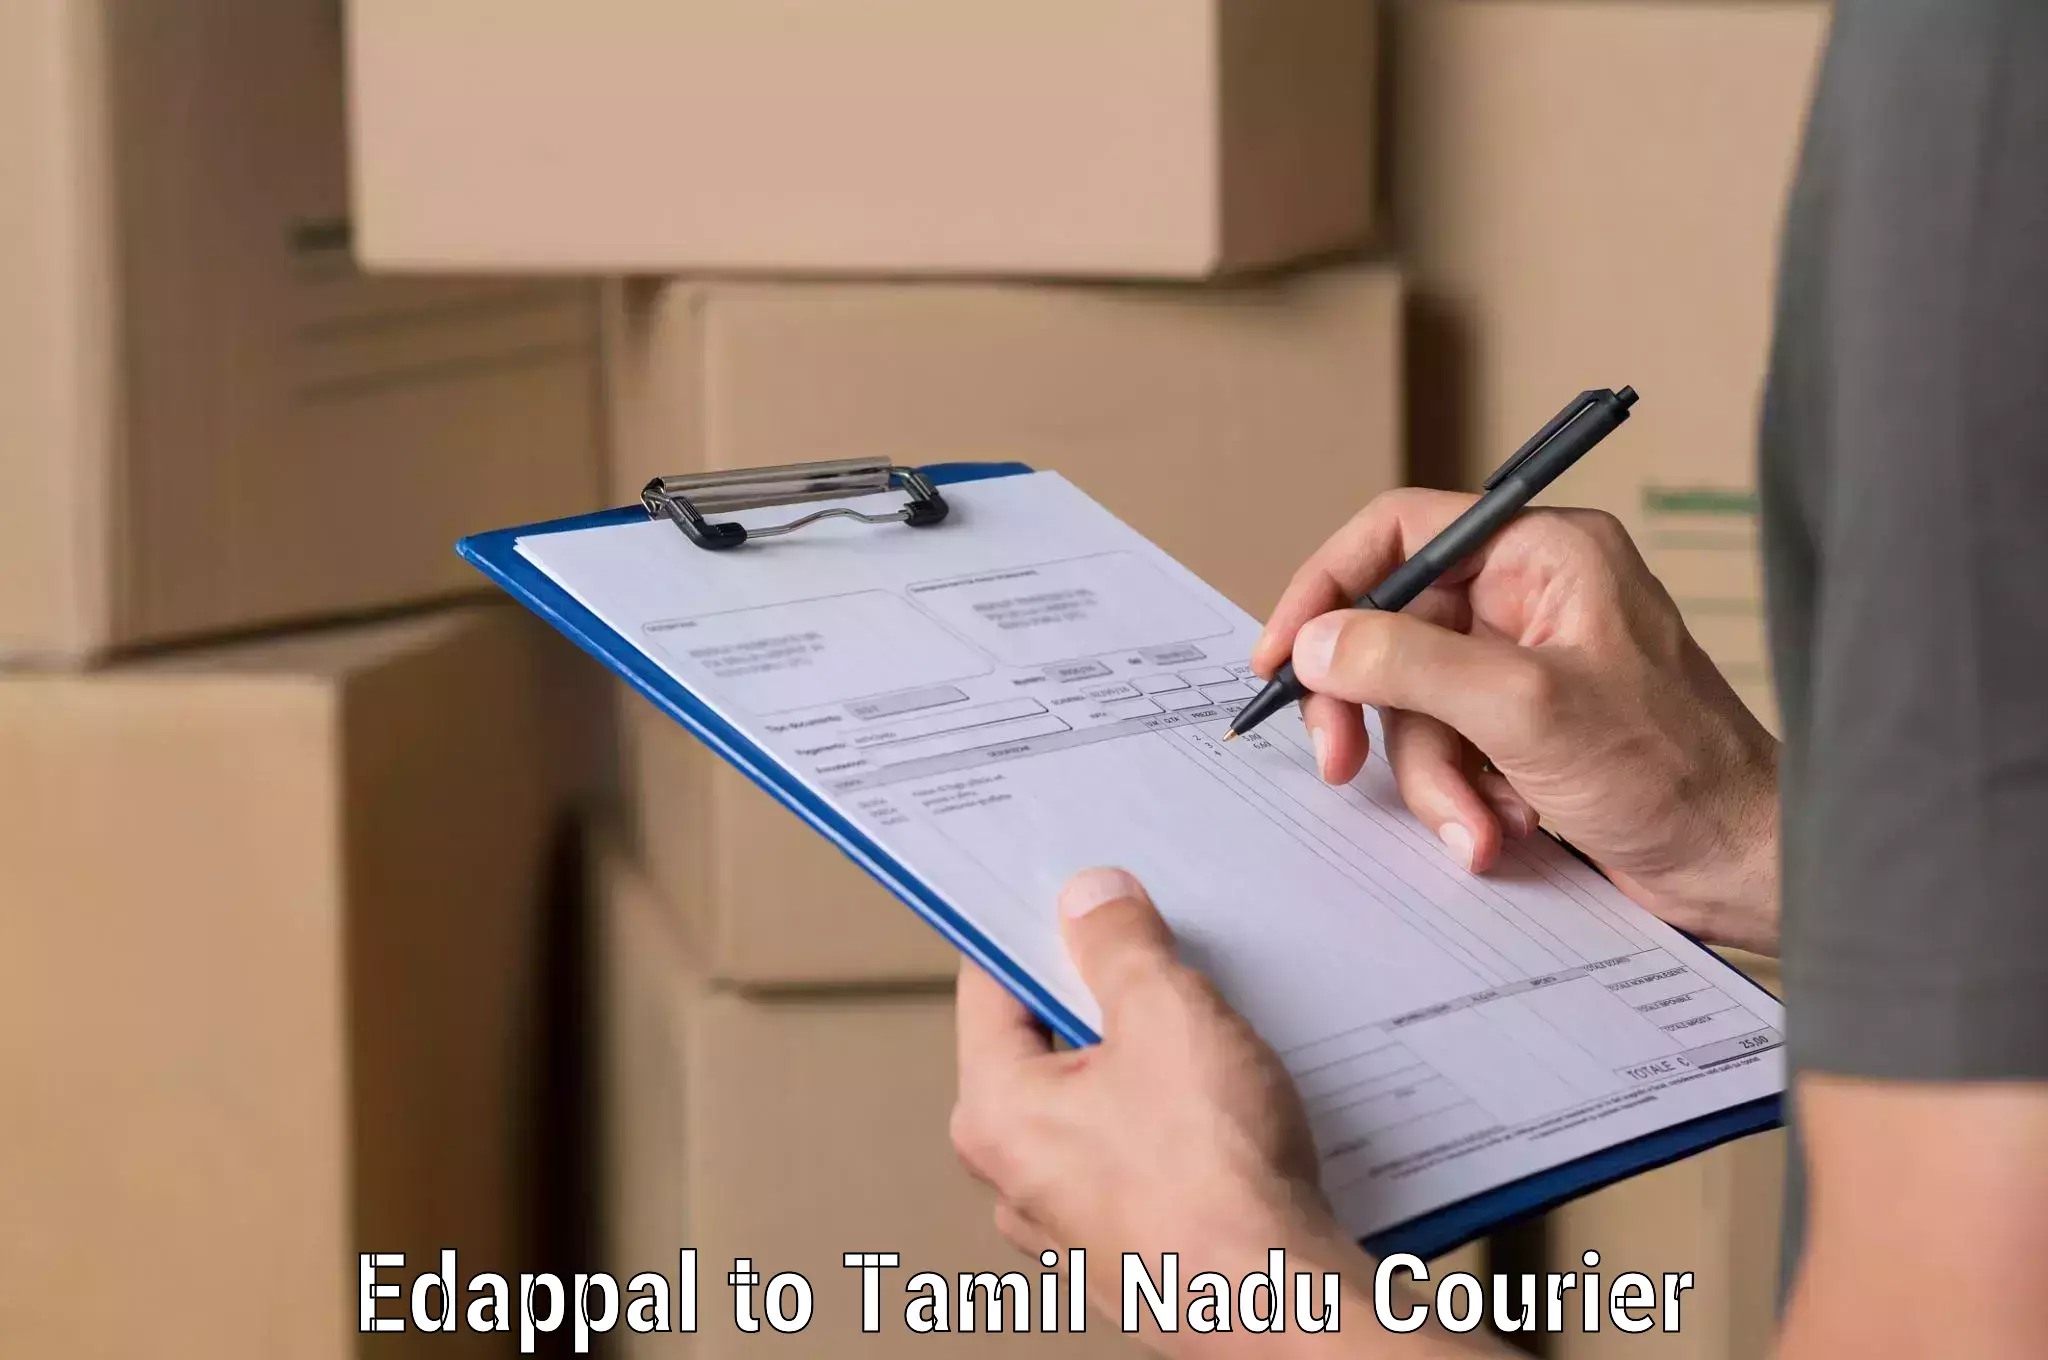 Global freight services Edappal to Coimbatore